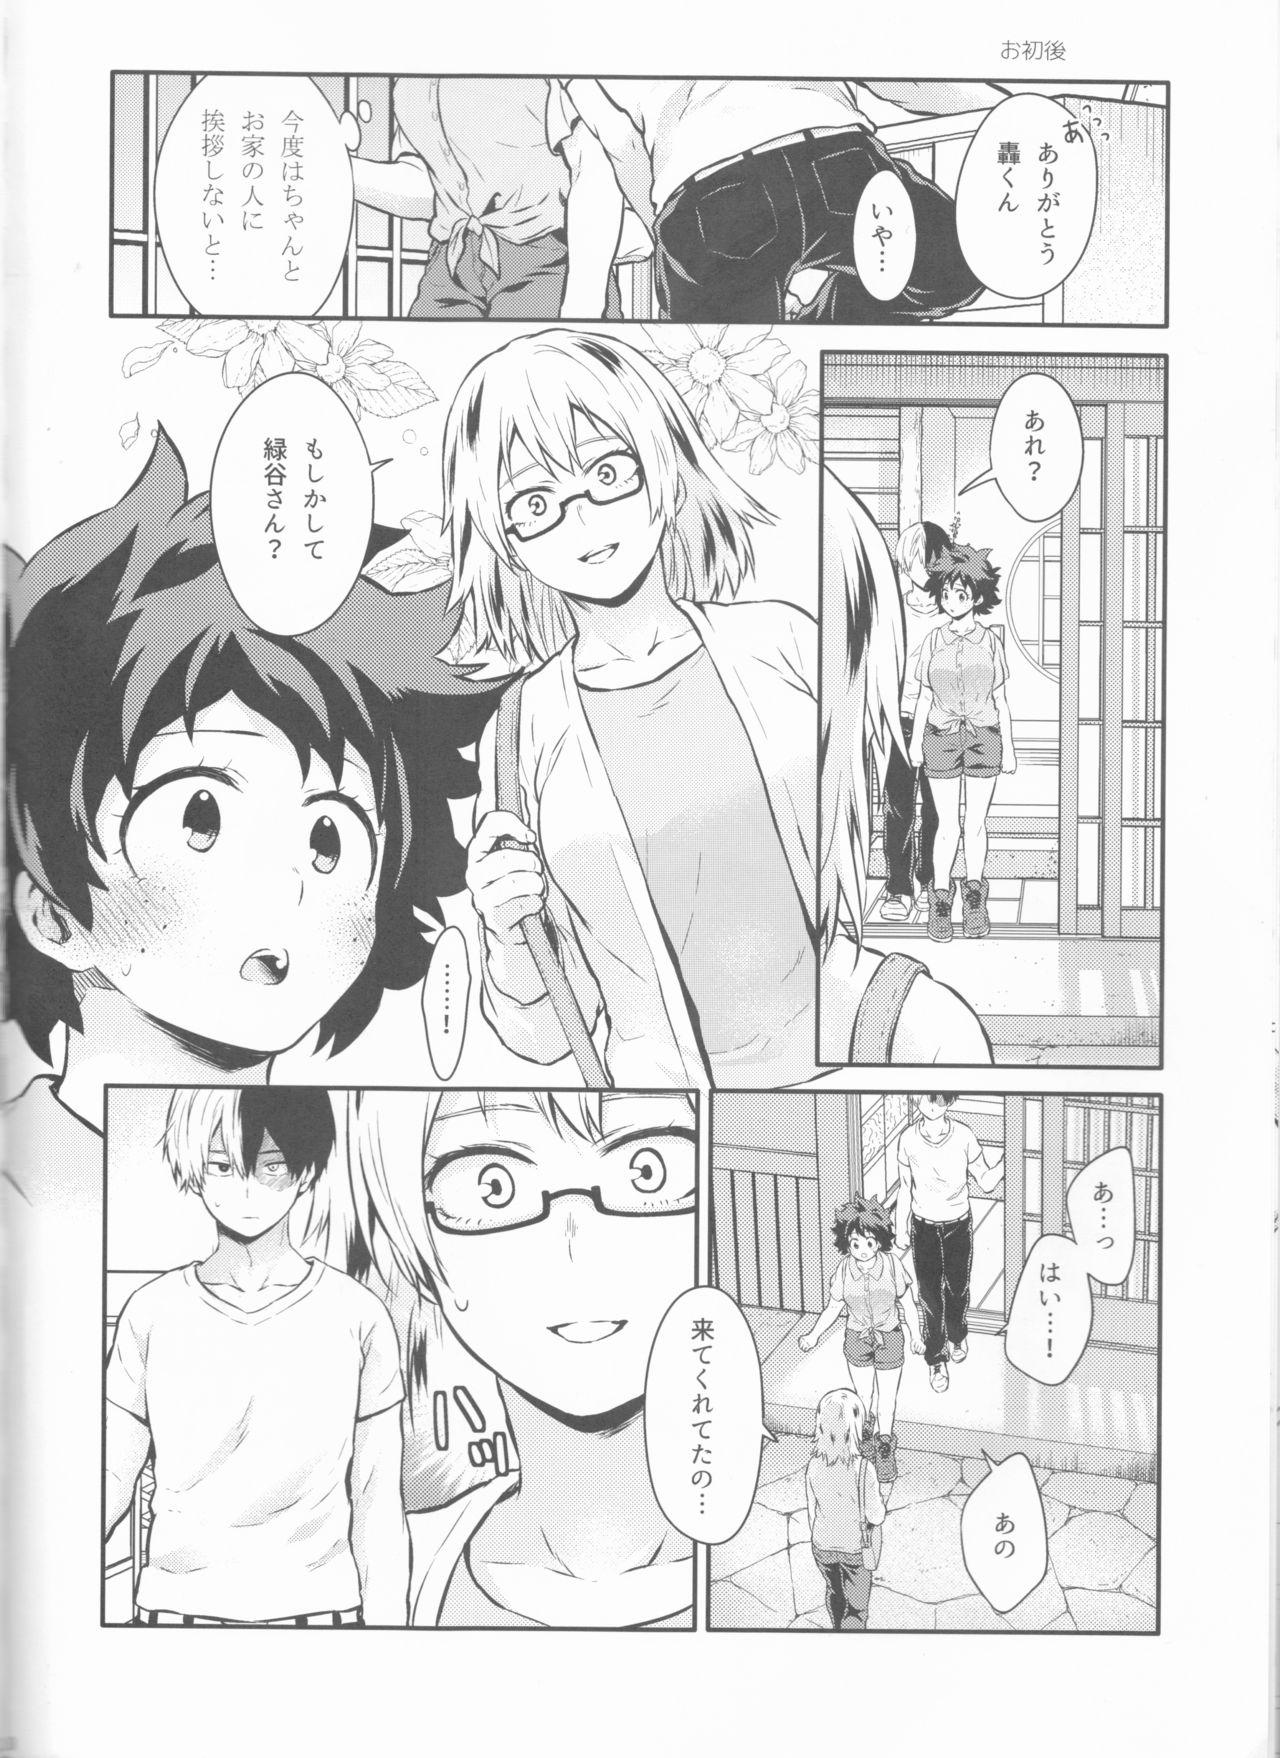 Super Love Me Tender another story - My hero academia Boy Girl - Page 10